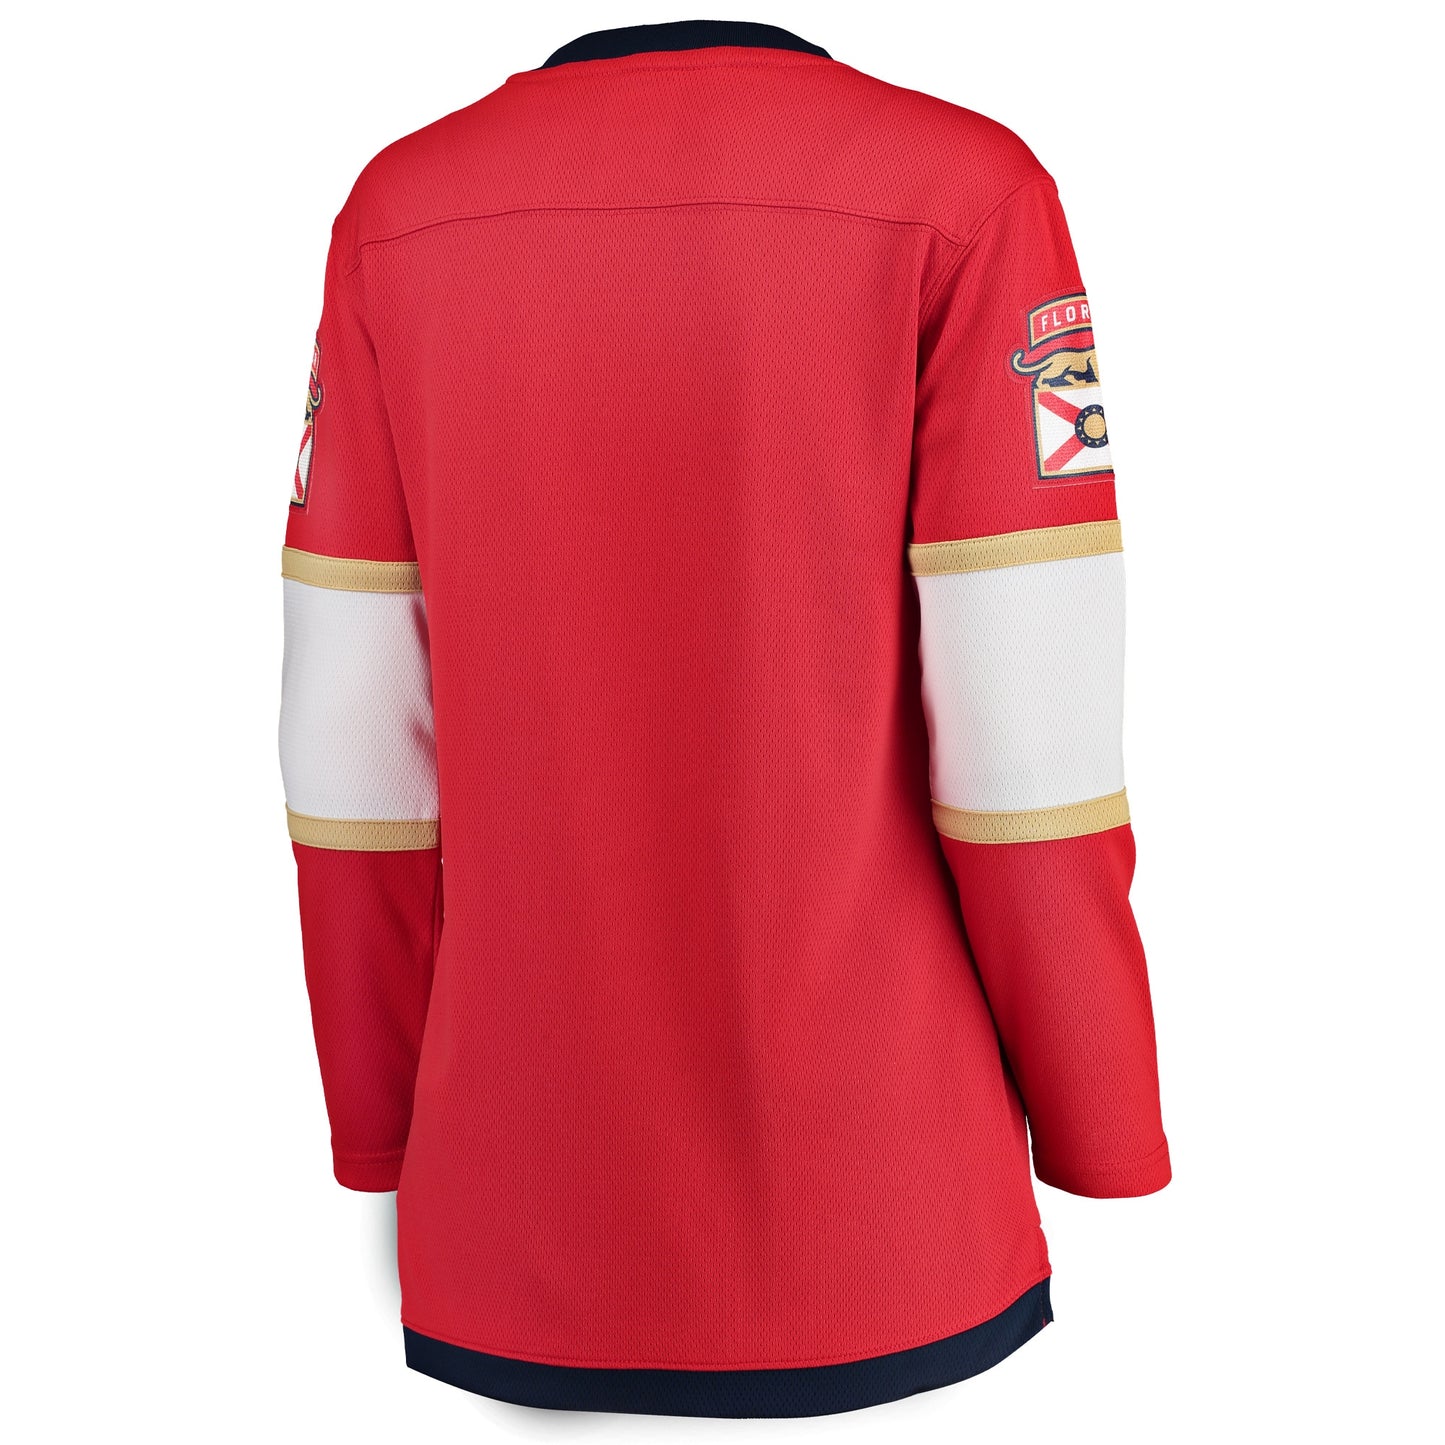 Florida Panthers Fanatics Branded Women's Breakaway Home Jersey - Red